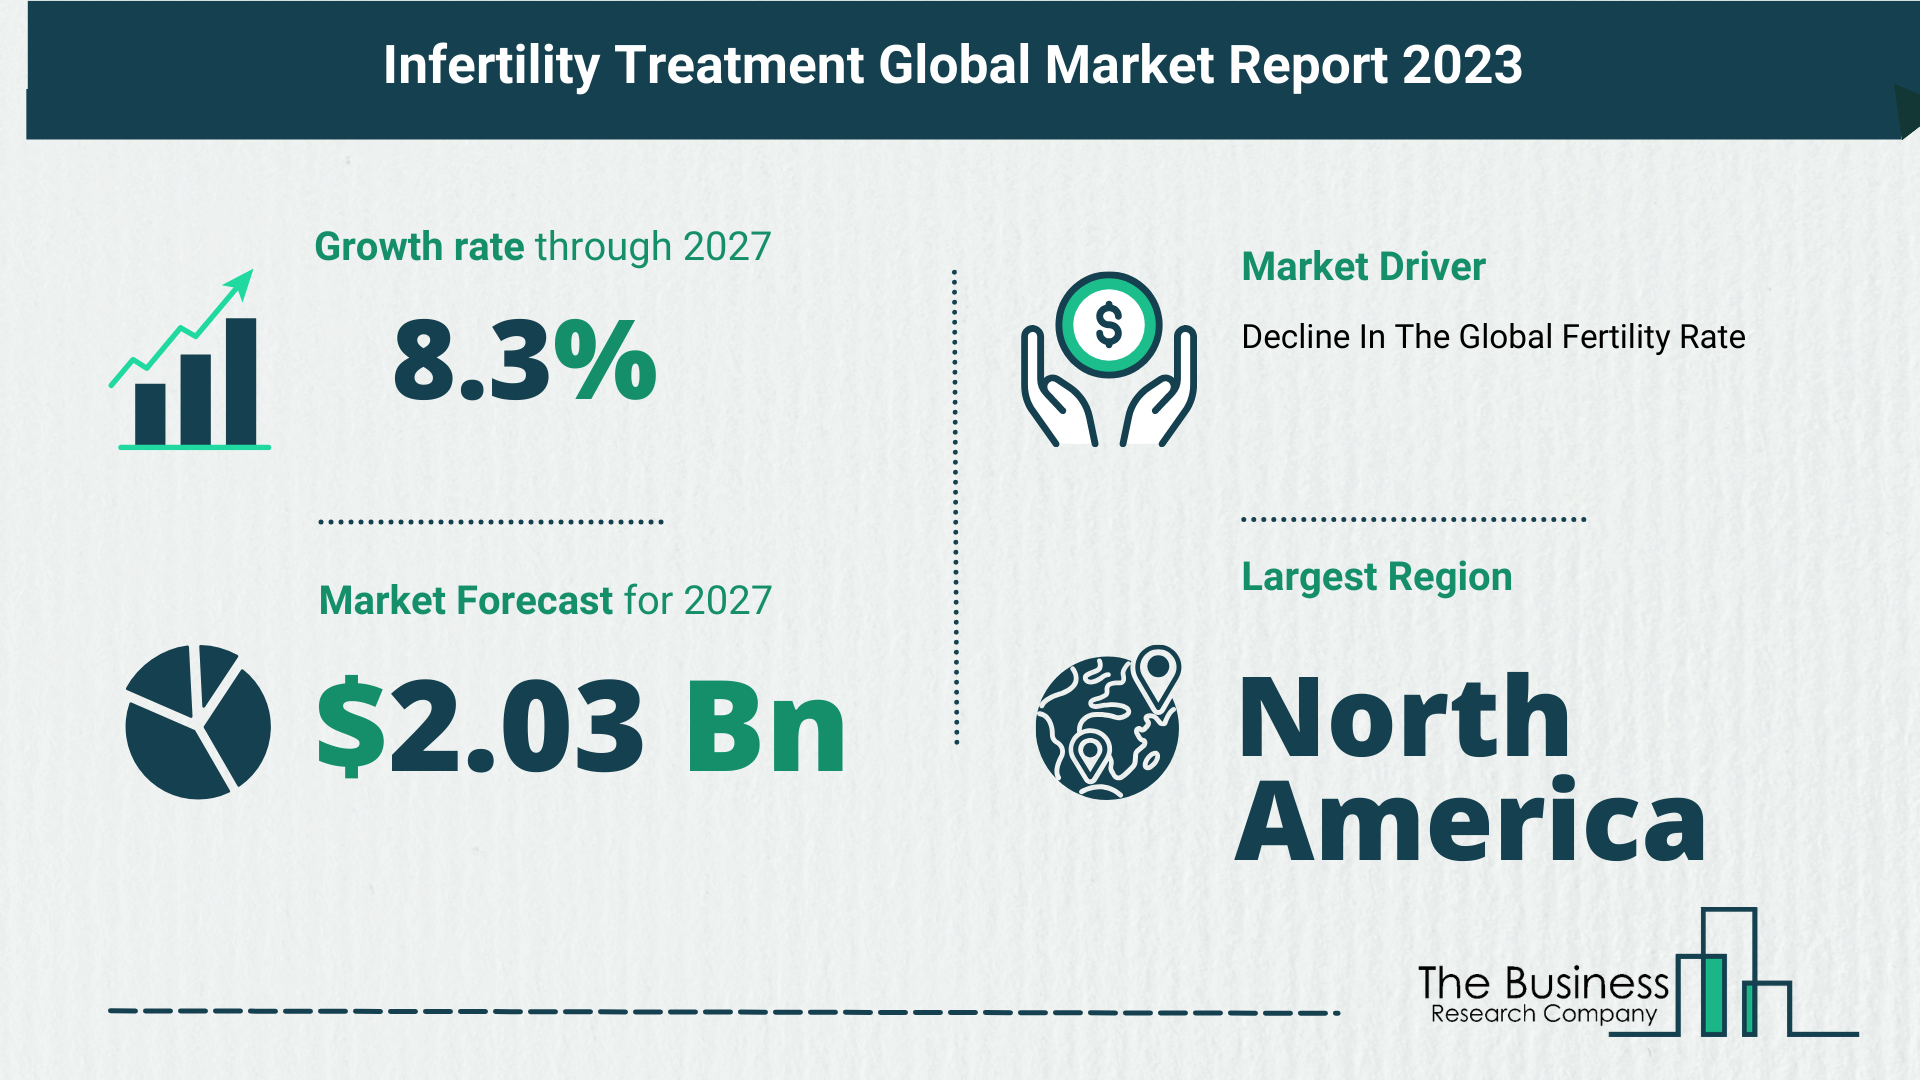 Top 5 Insights From The Infertility Treatment Market Report 2023